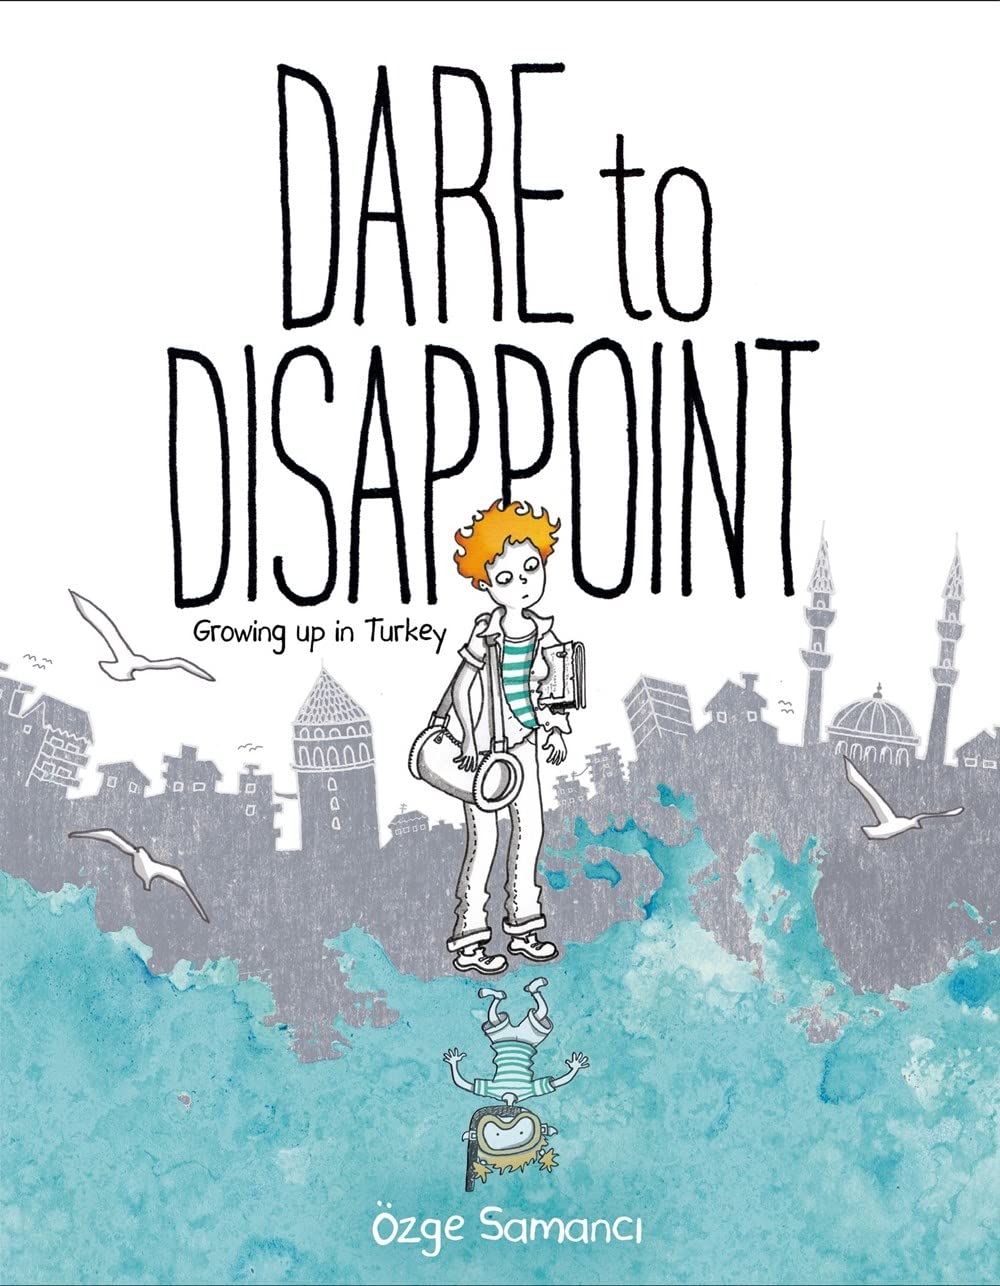 Dare to Disappoint: Growing Up in Turkey